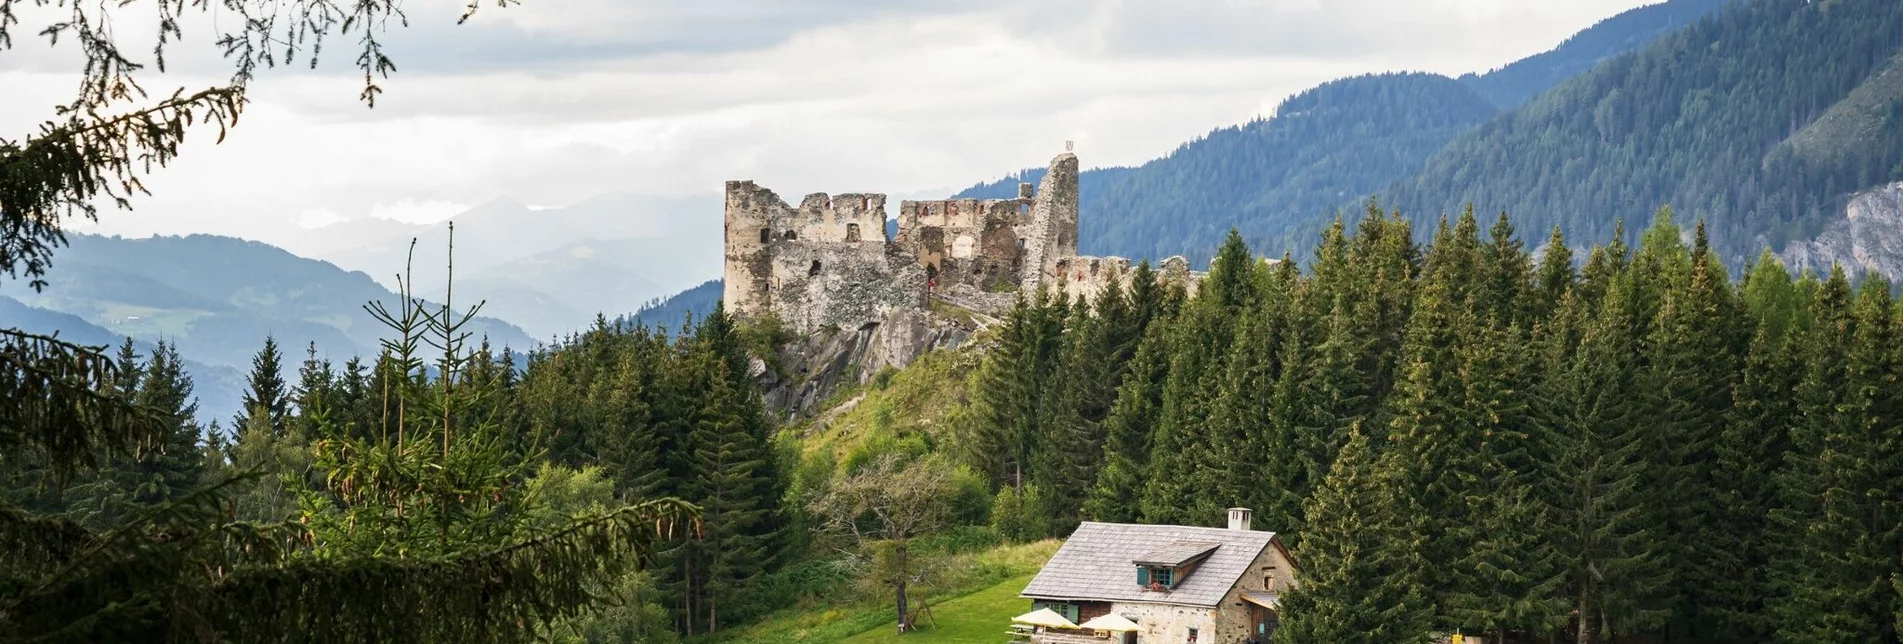 Hiking route From the “Old Smithy” to the stone castle - Touren-Impression #1 | © Tourismusverband Region Murau